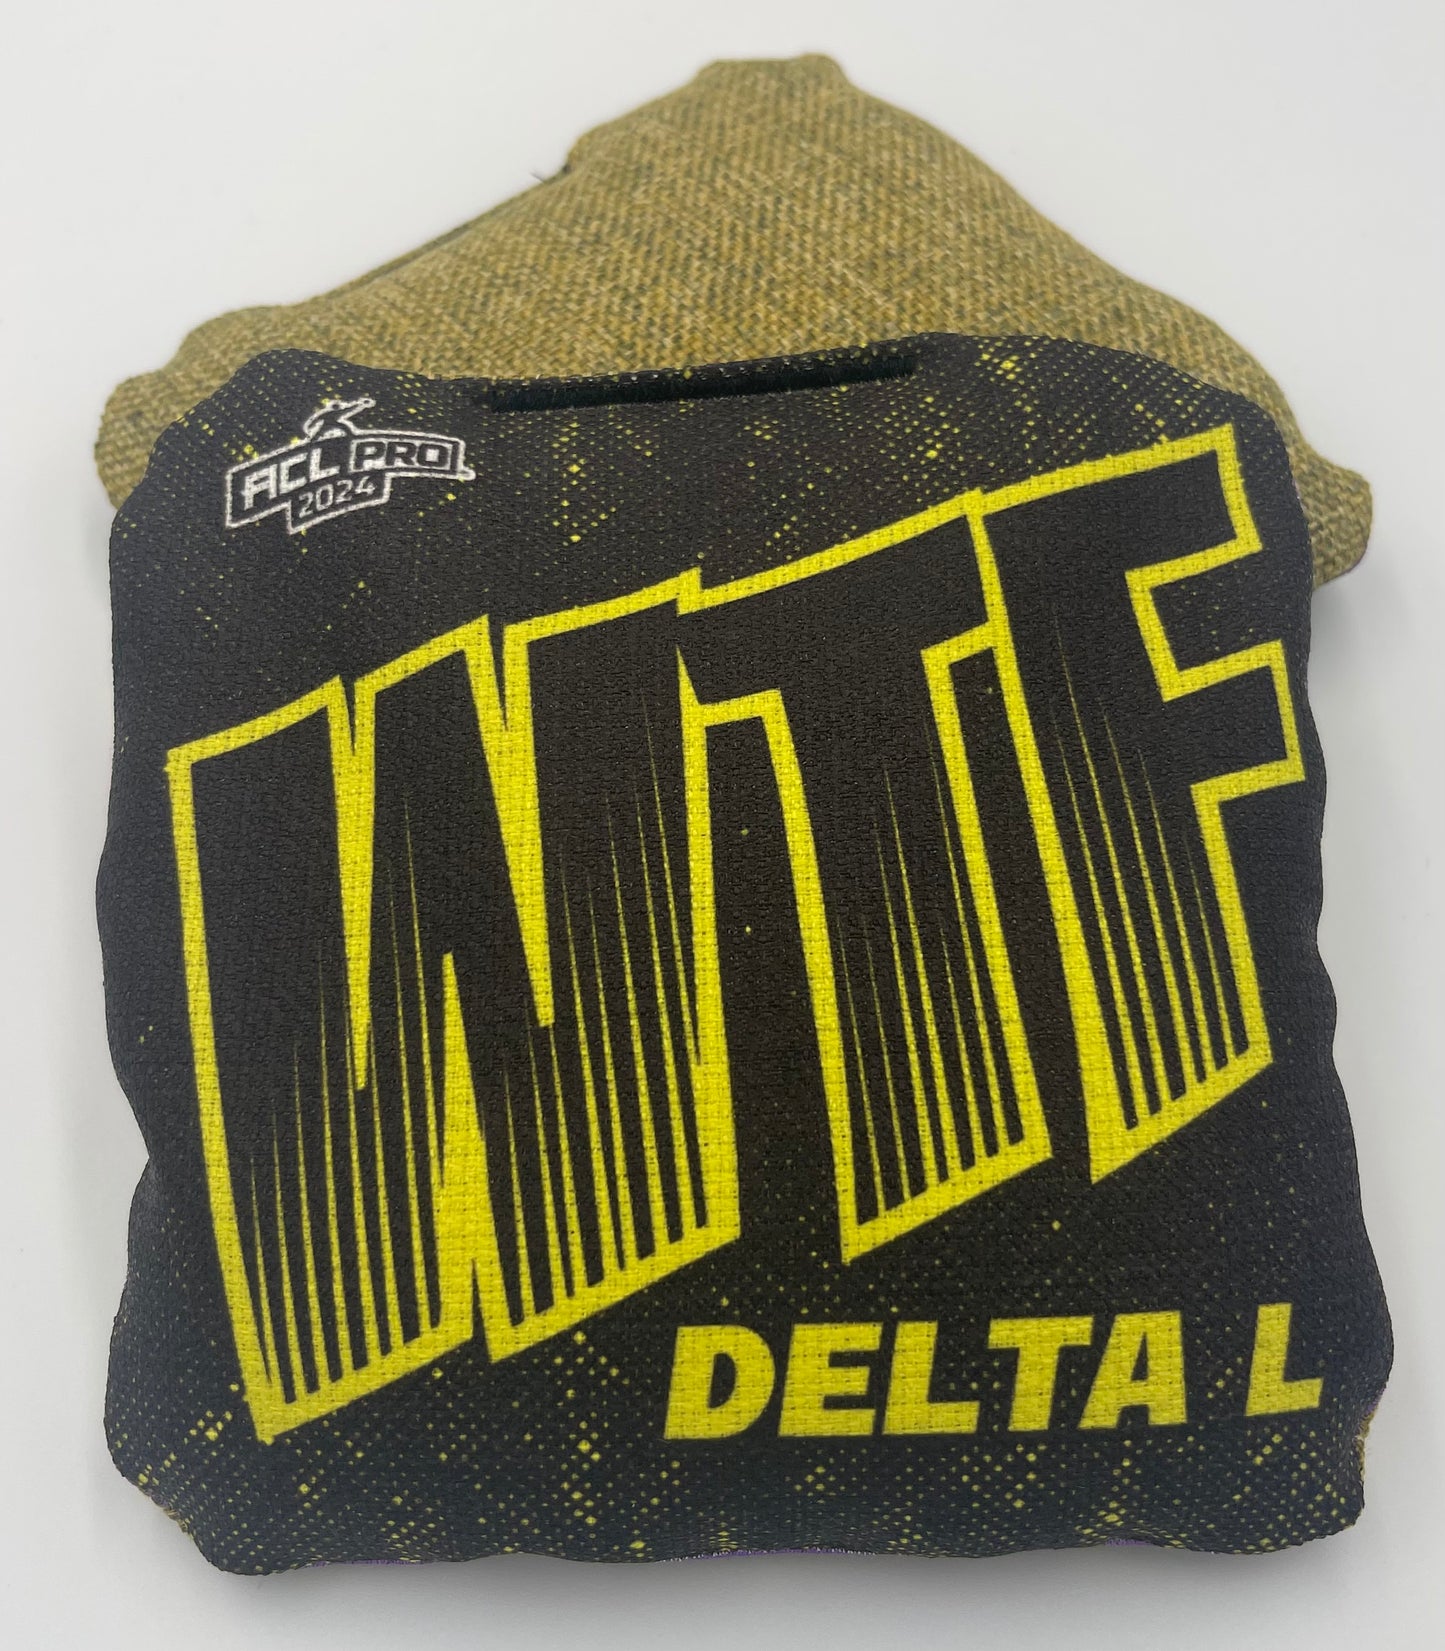 Delta L - ACL Pro Stamped Cornhole Bags - Set of 4 bags